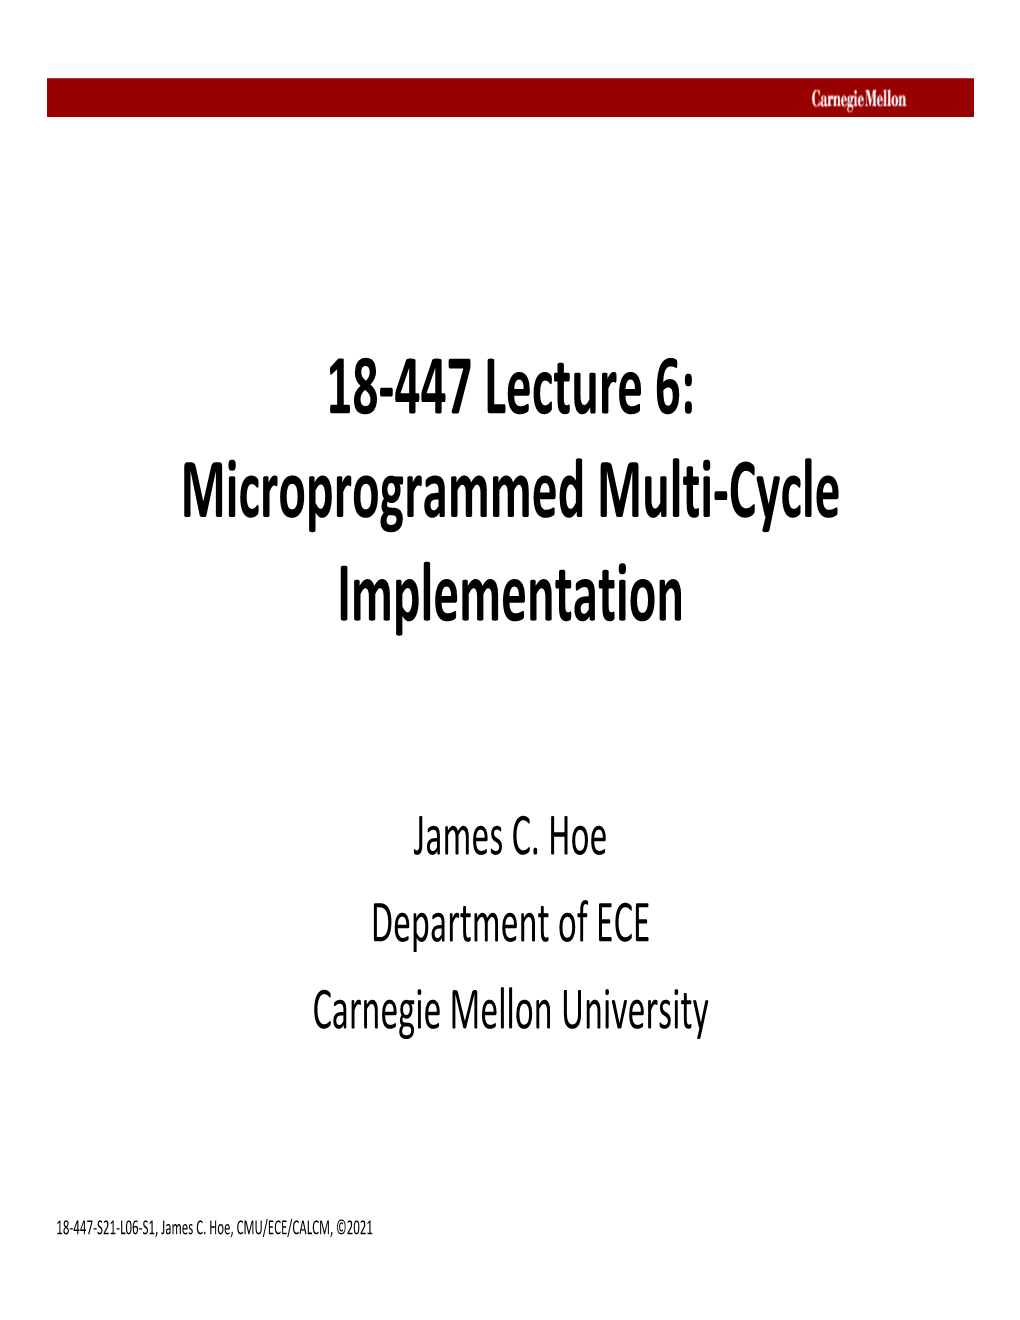 18-447 Lecture 6: Microprogrammed Multi-Cycle Implementation